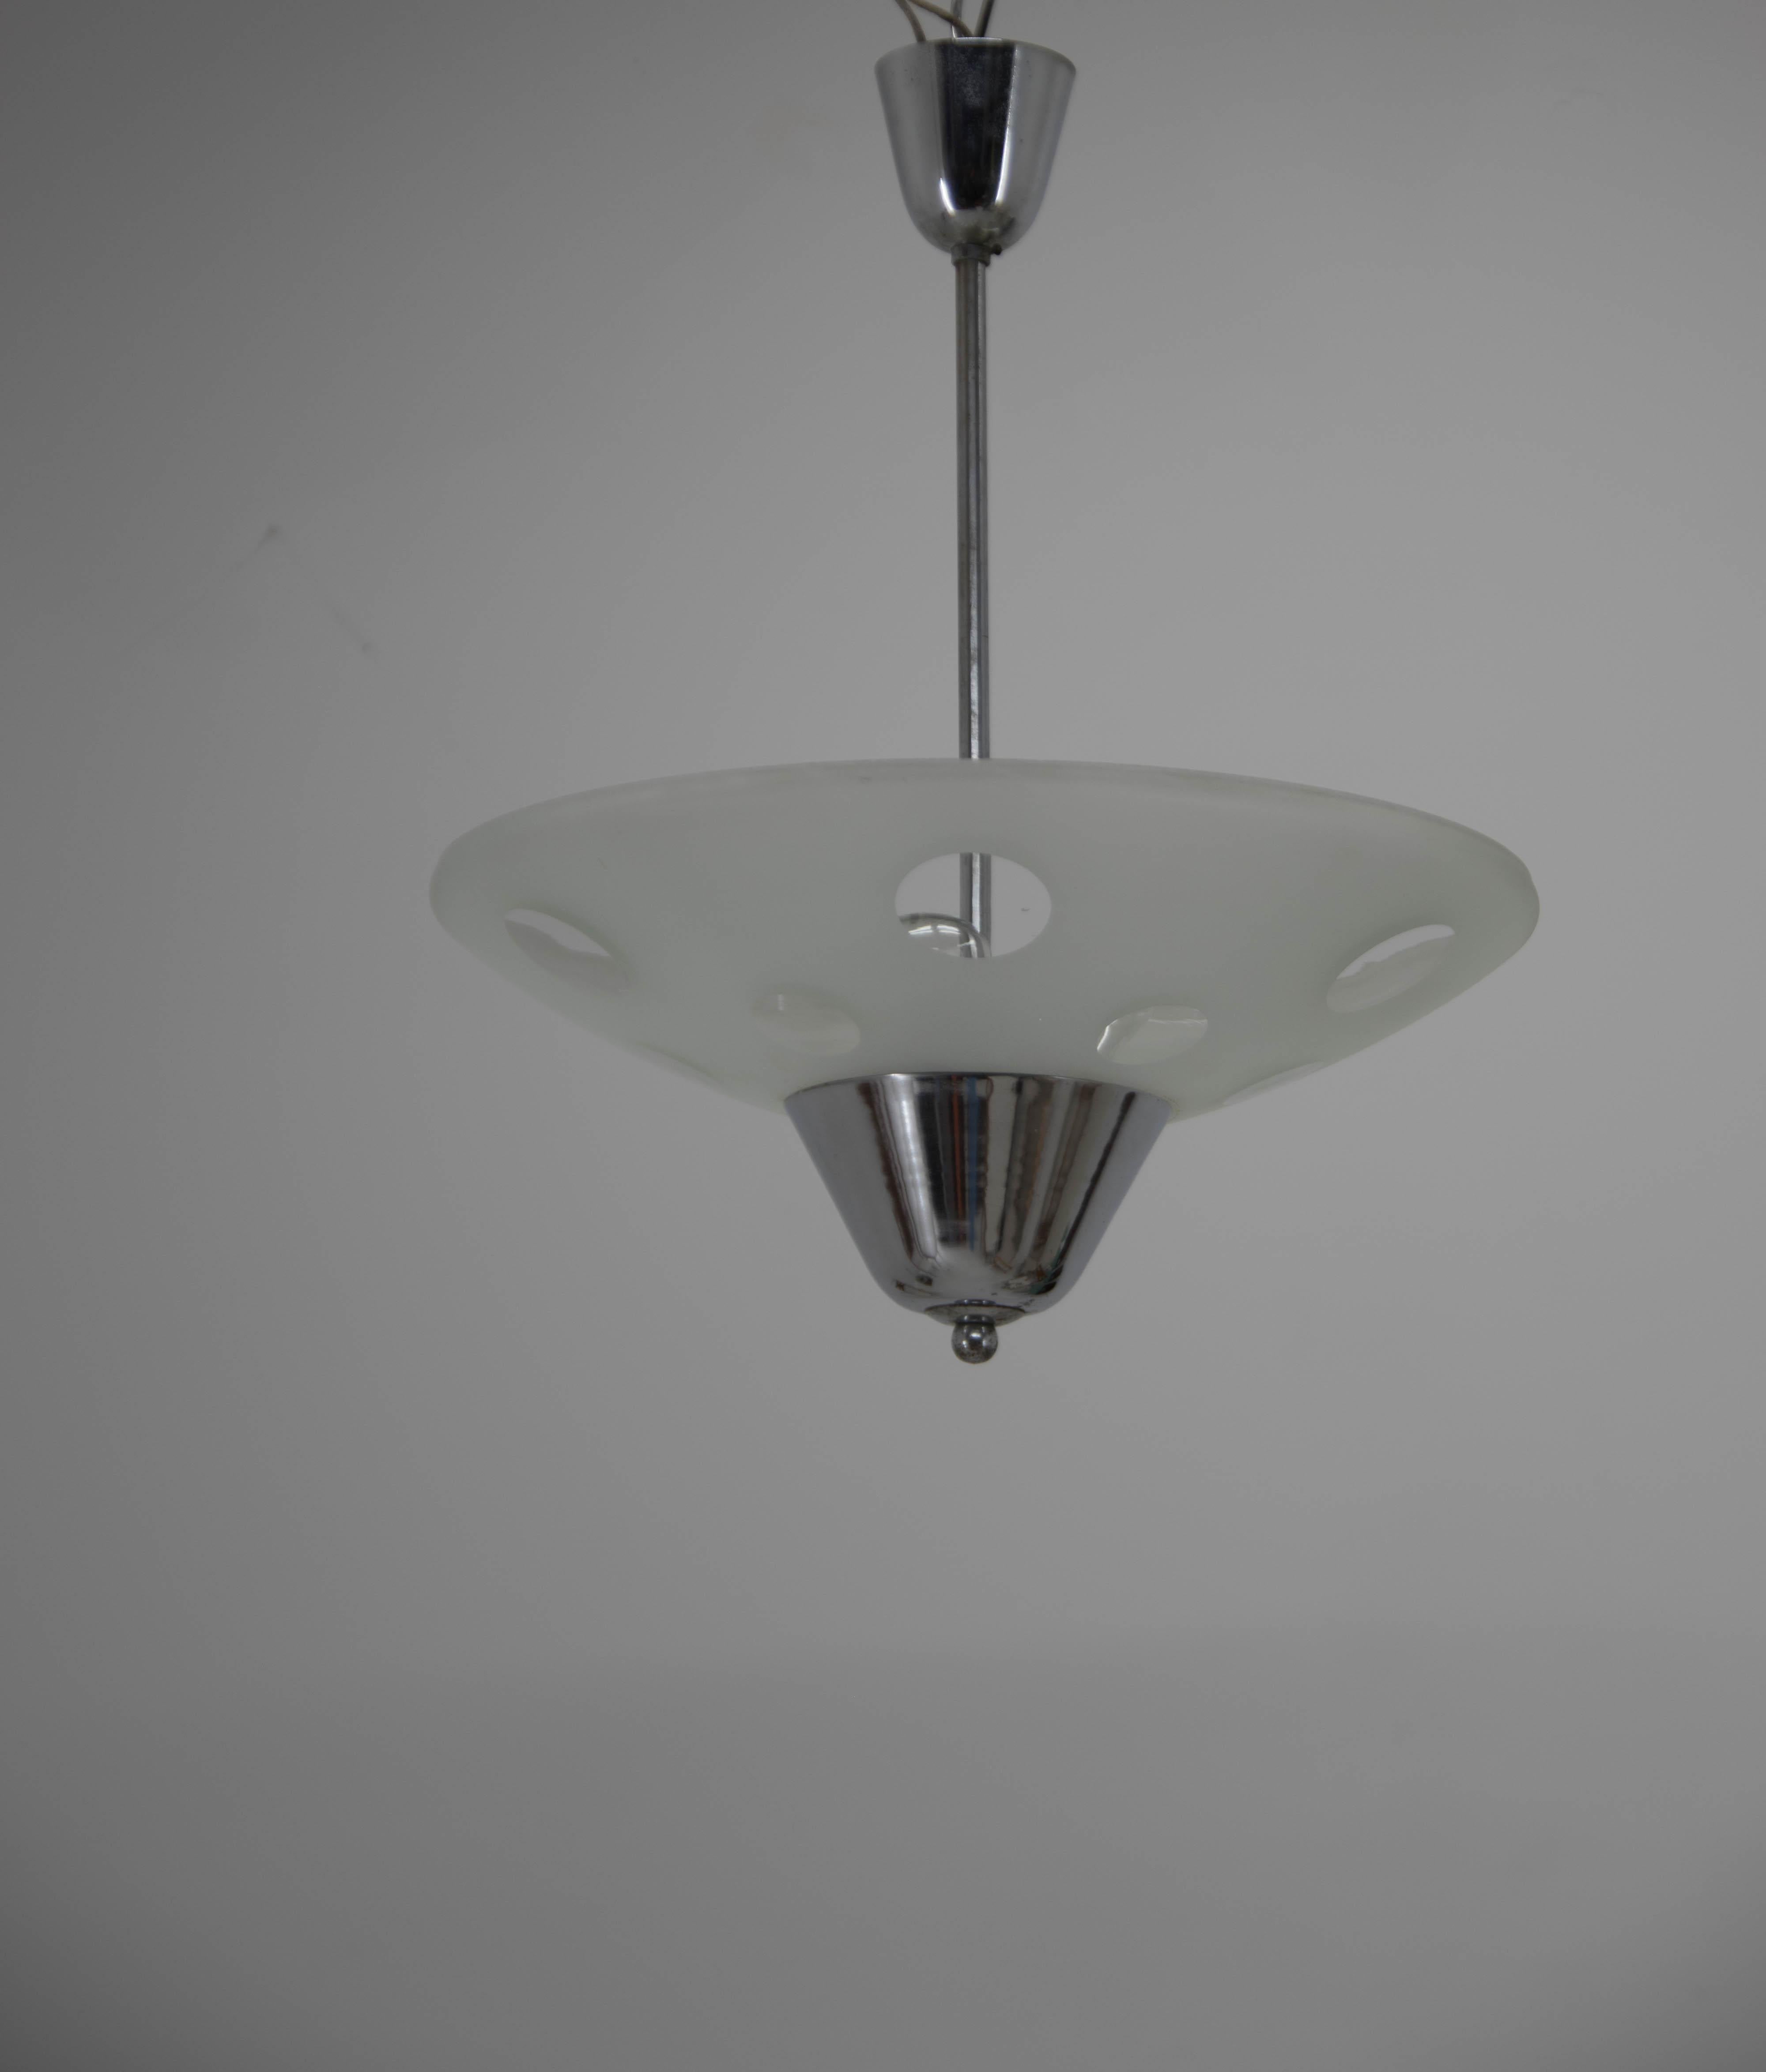 Czech Rare Bauhaus Chandelier by Franta Anyz for Napako, 1940s For Sale